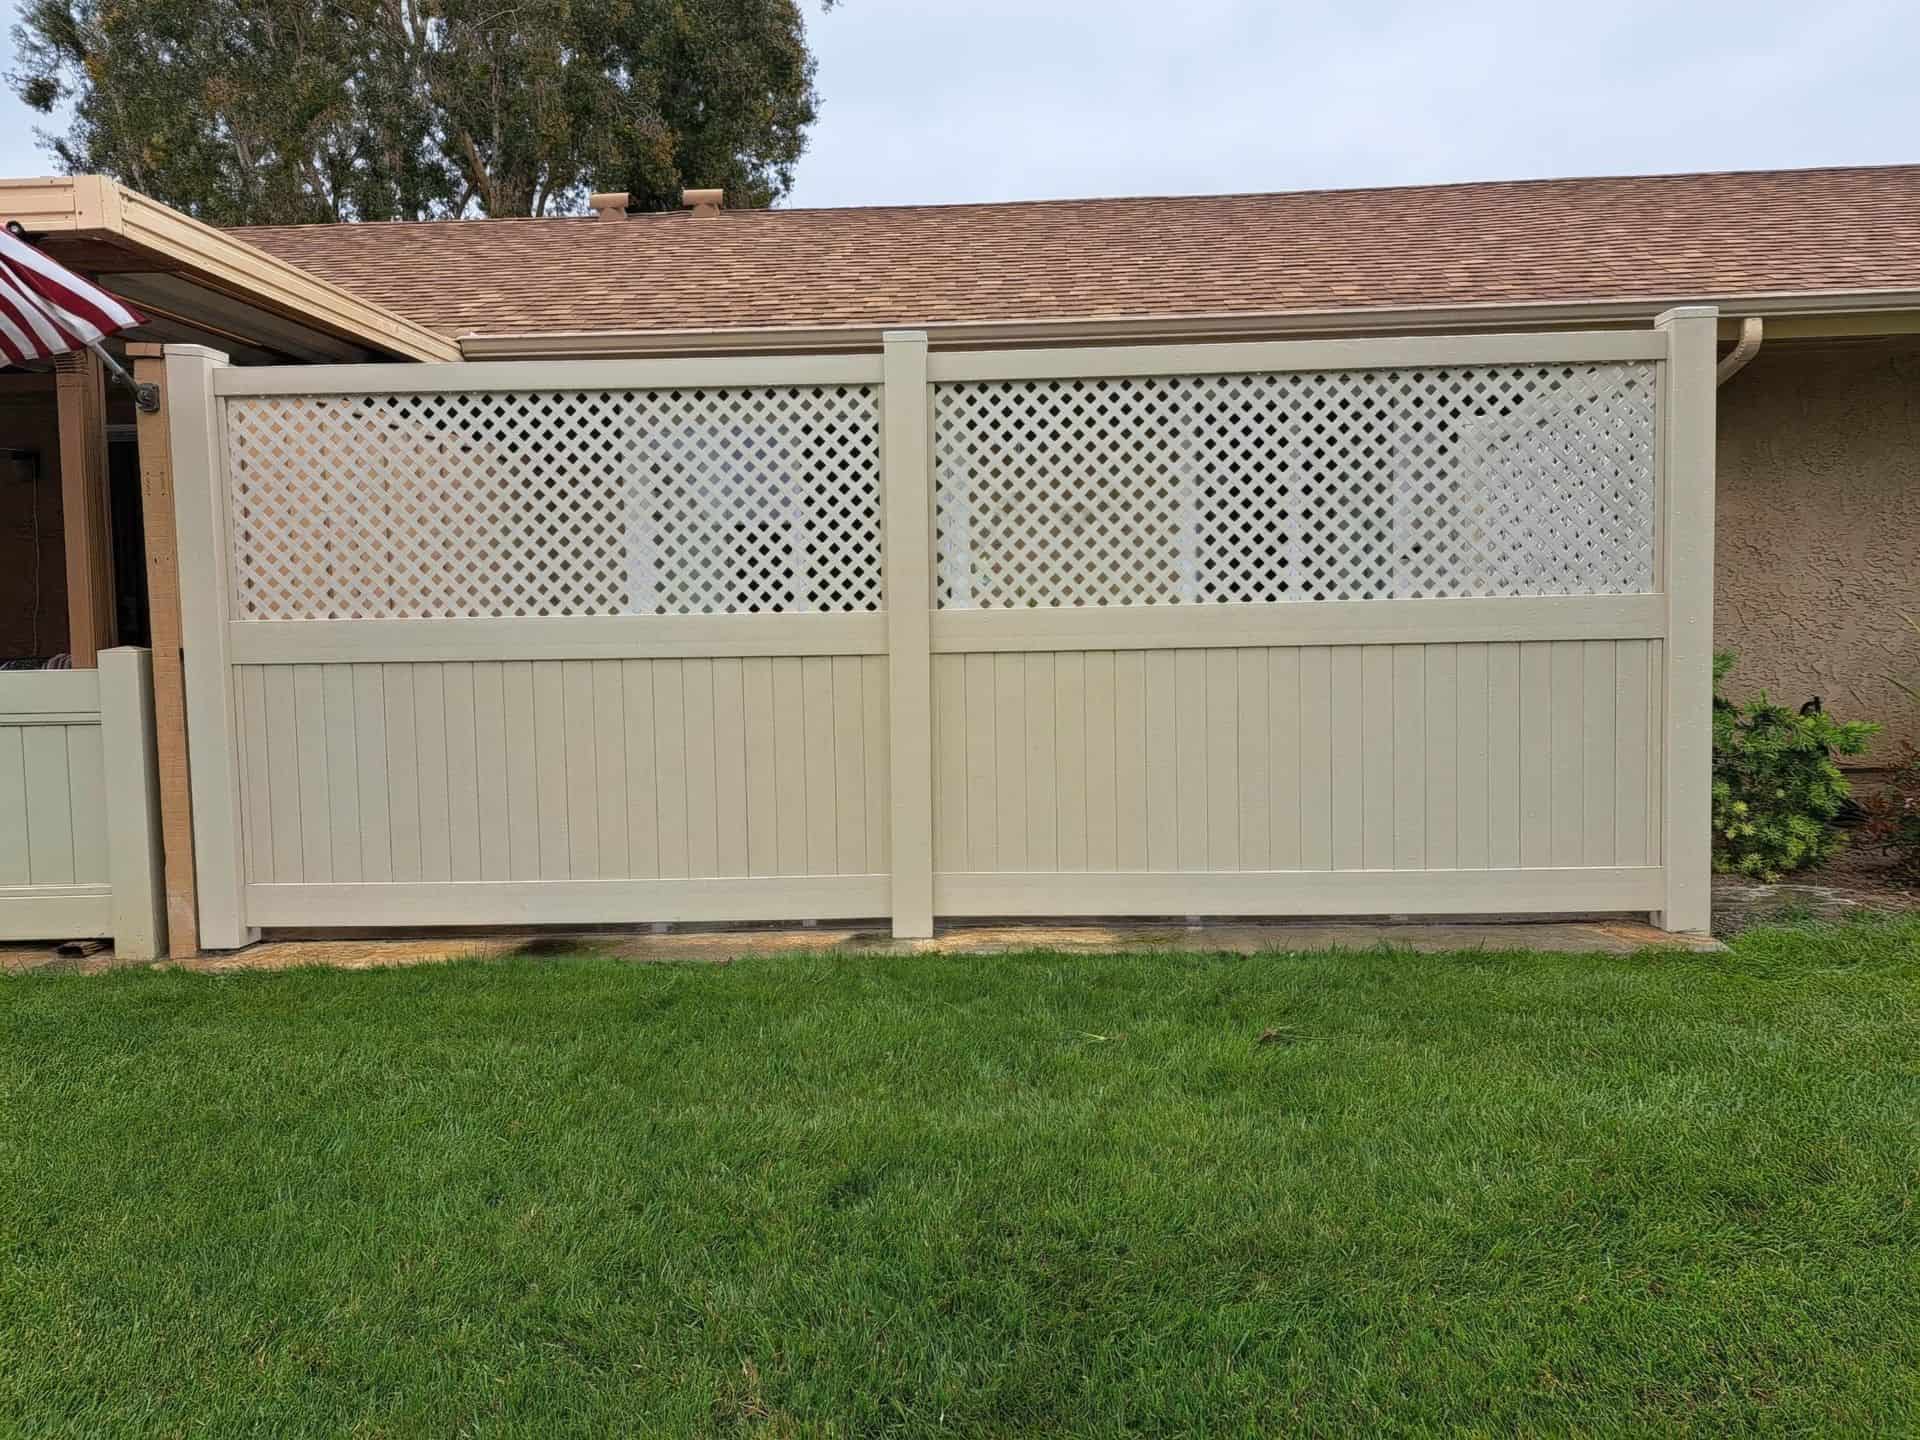 Vinyl privacy and lattice fence with gate giving entrance into small garden with trees and multiple plants